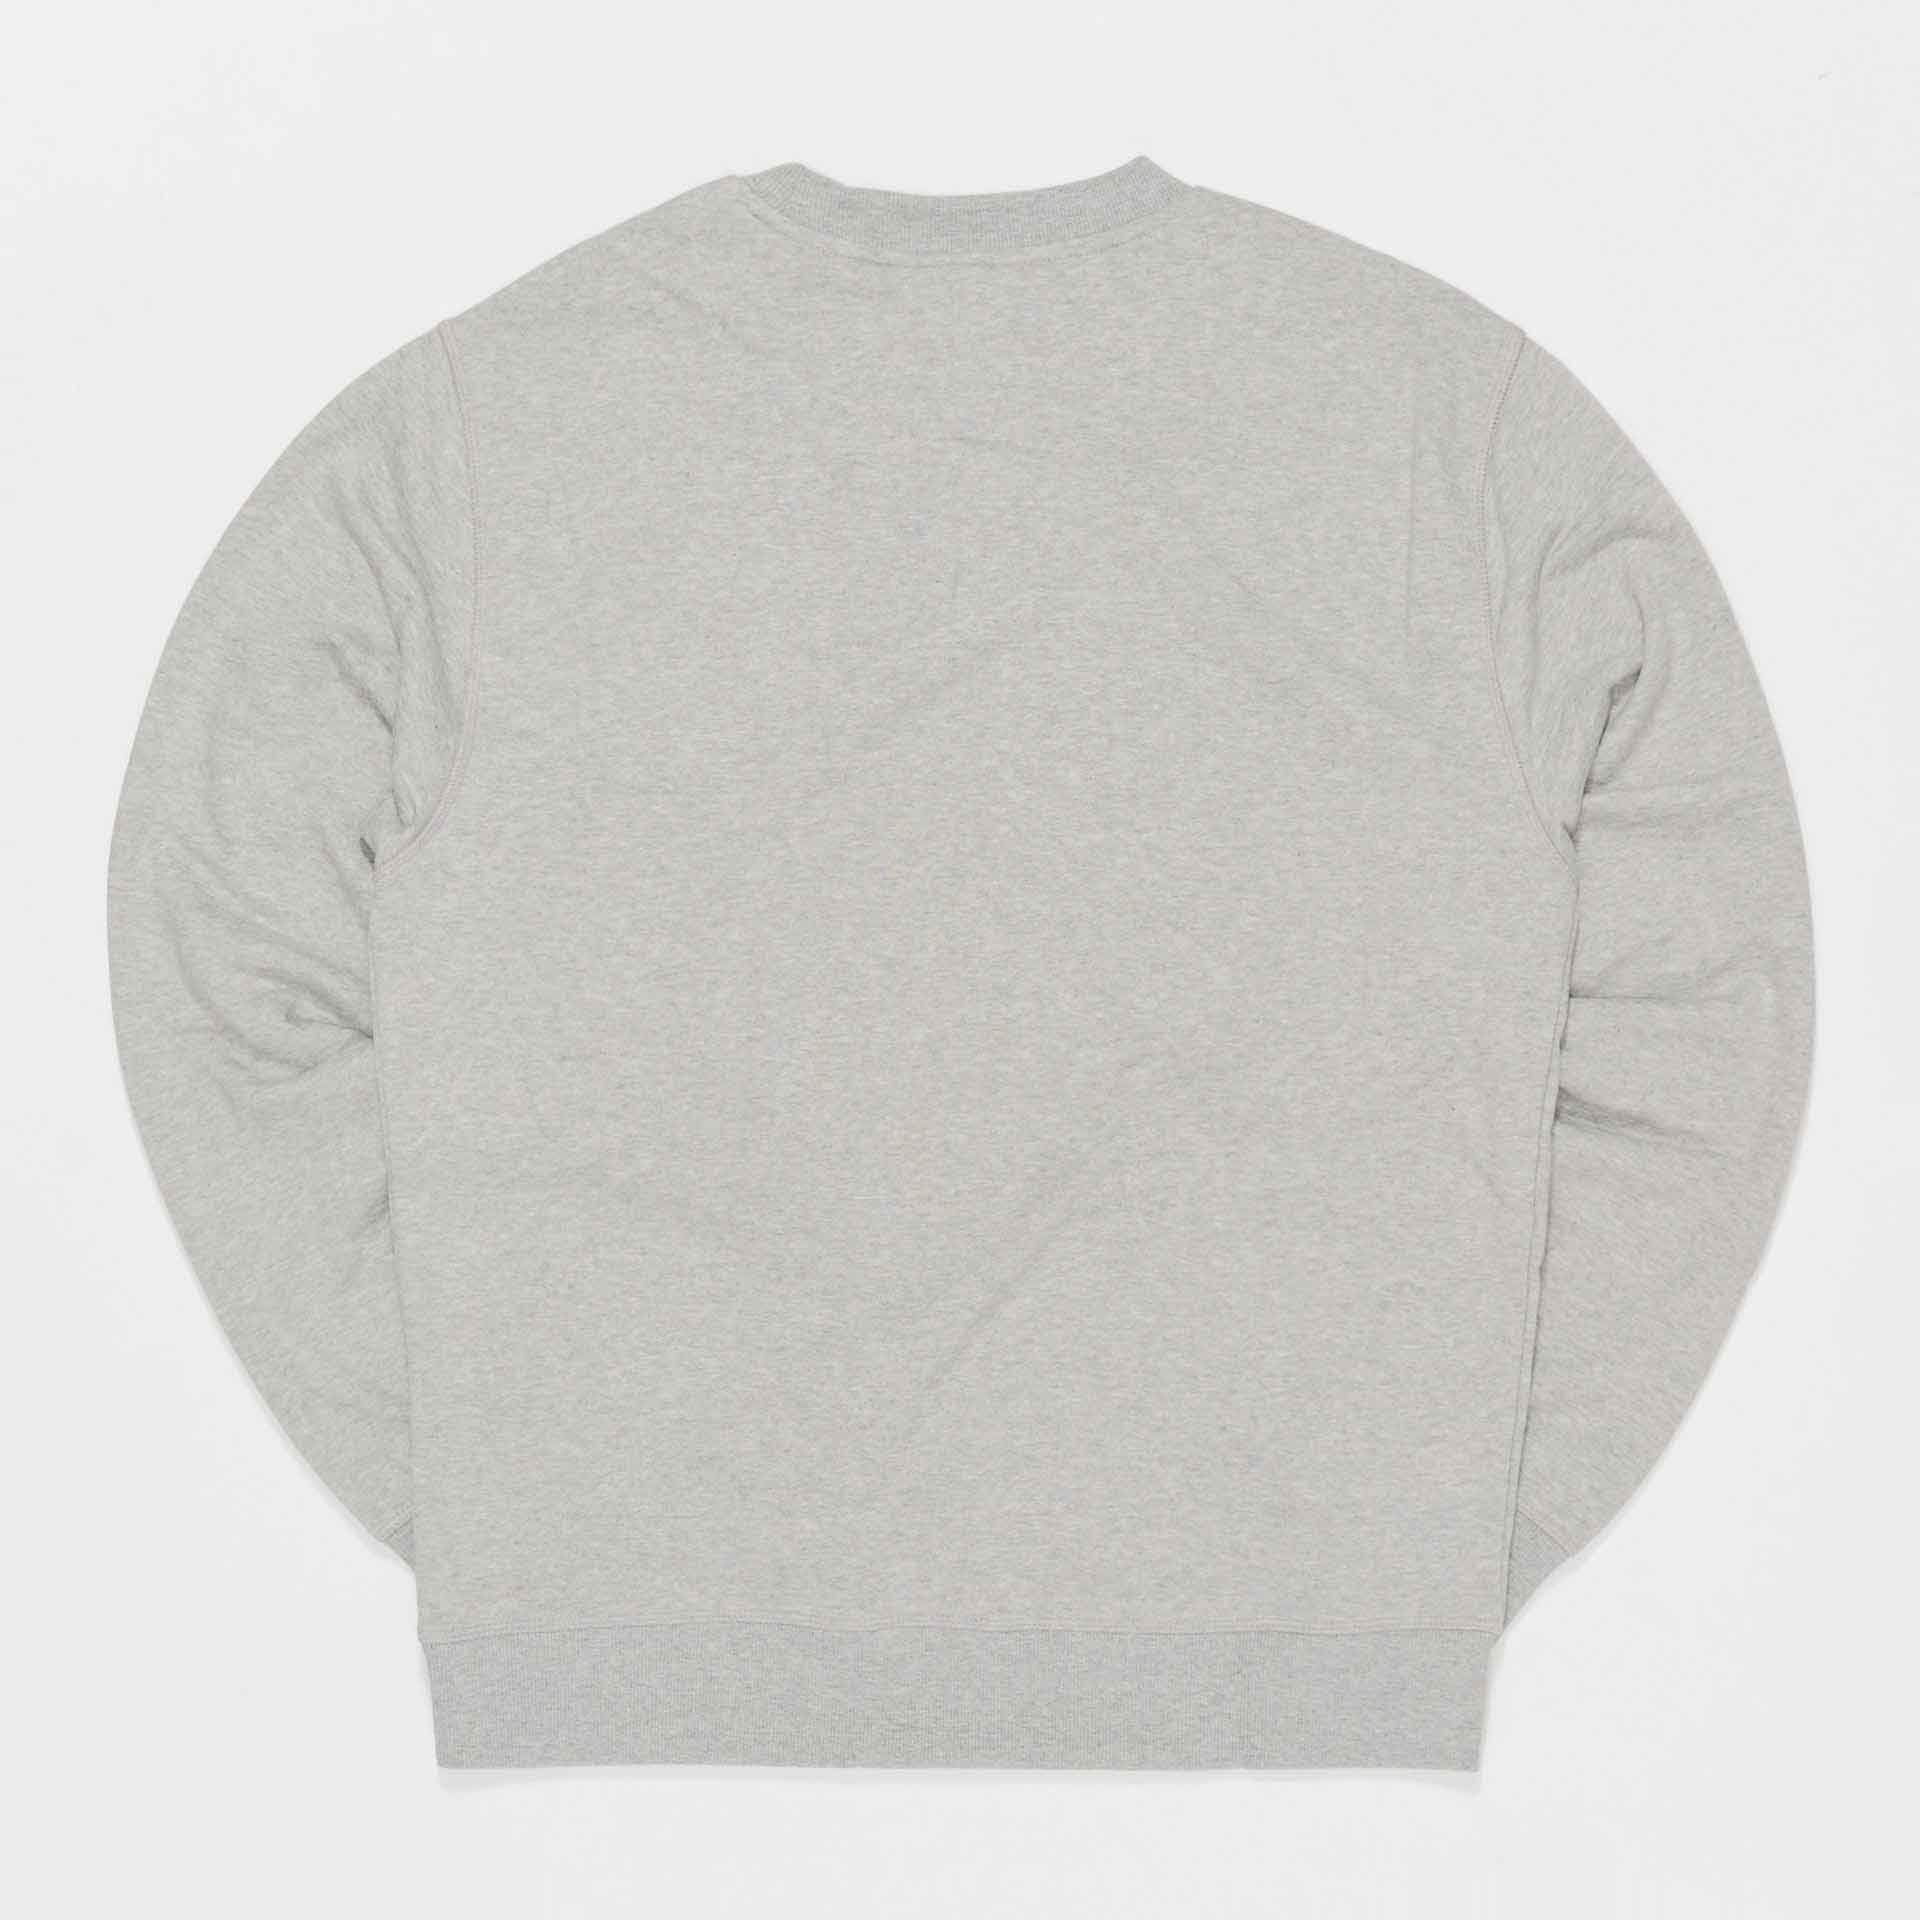 New Balance Essentials Stacked Logo French Terry Crewneck Athletic Grey